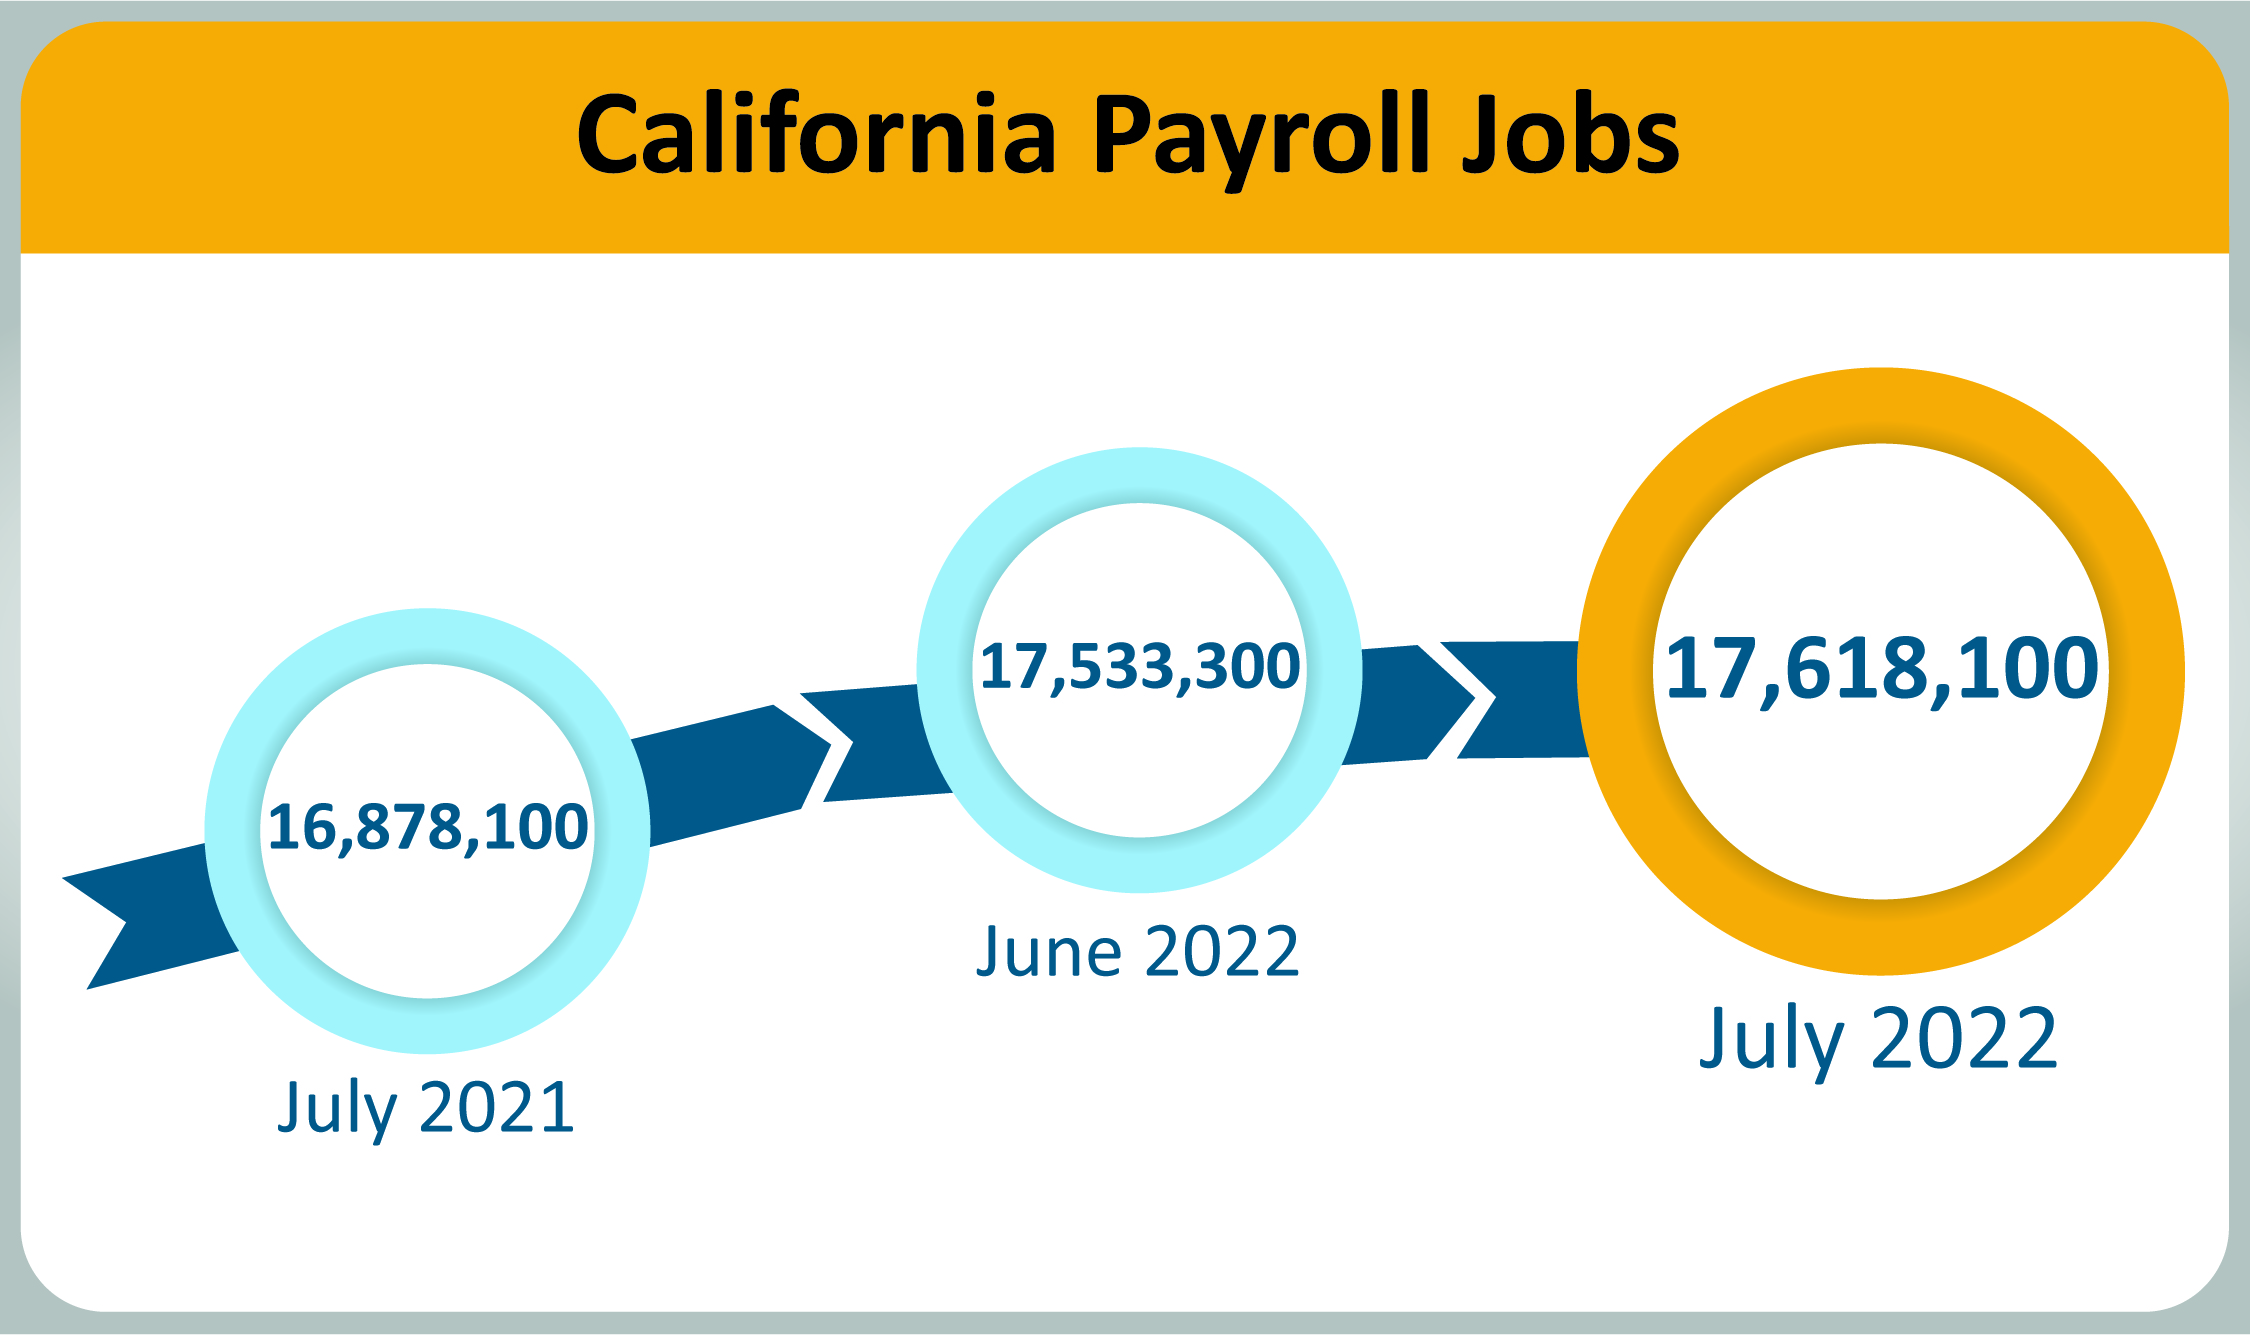 California payroll jobs totaled 17,618,100 in July 2022, up 84,800 from June 2022 and up 850,600 from July of last year.